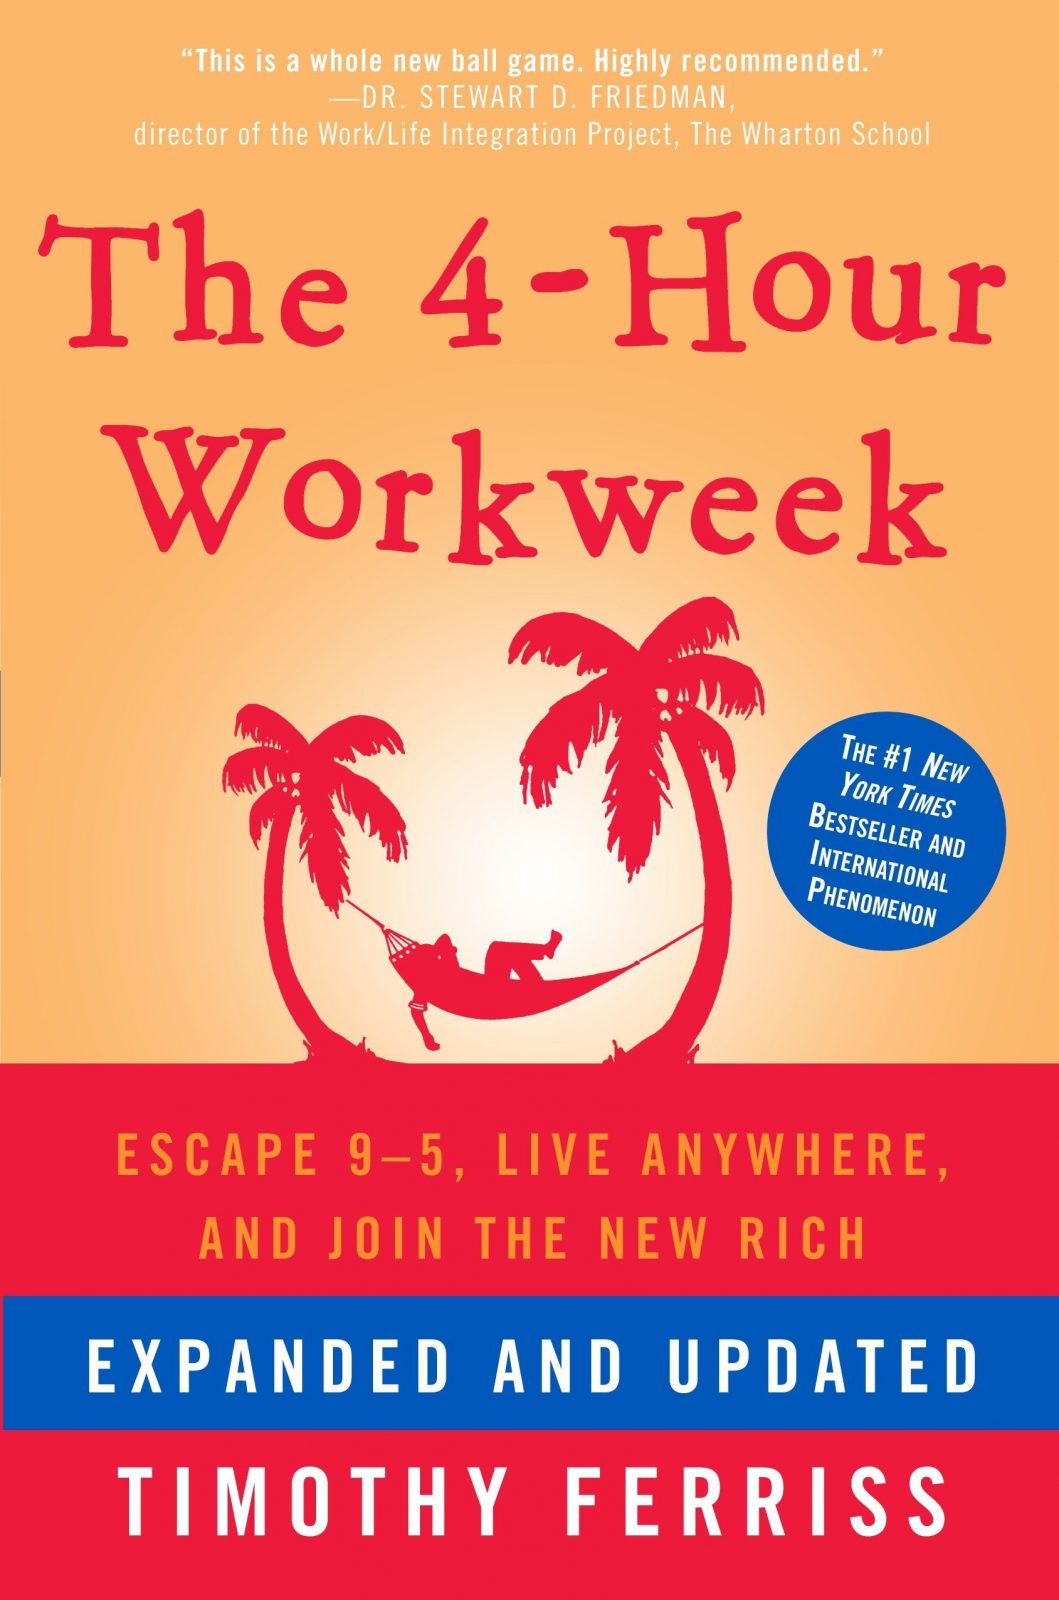 The 4-Hour Workweek Book Cover